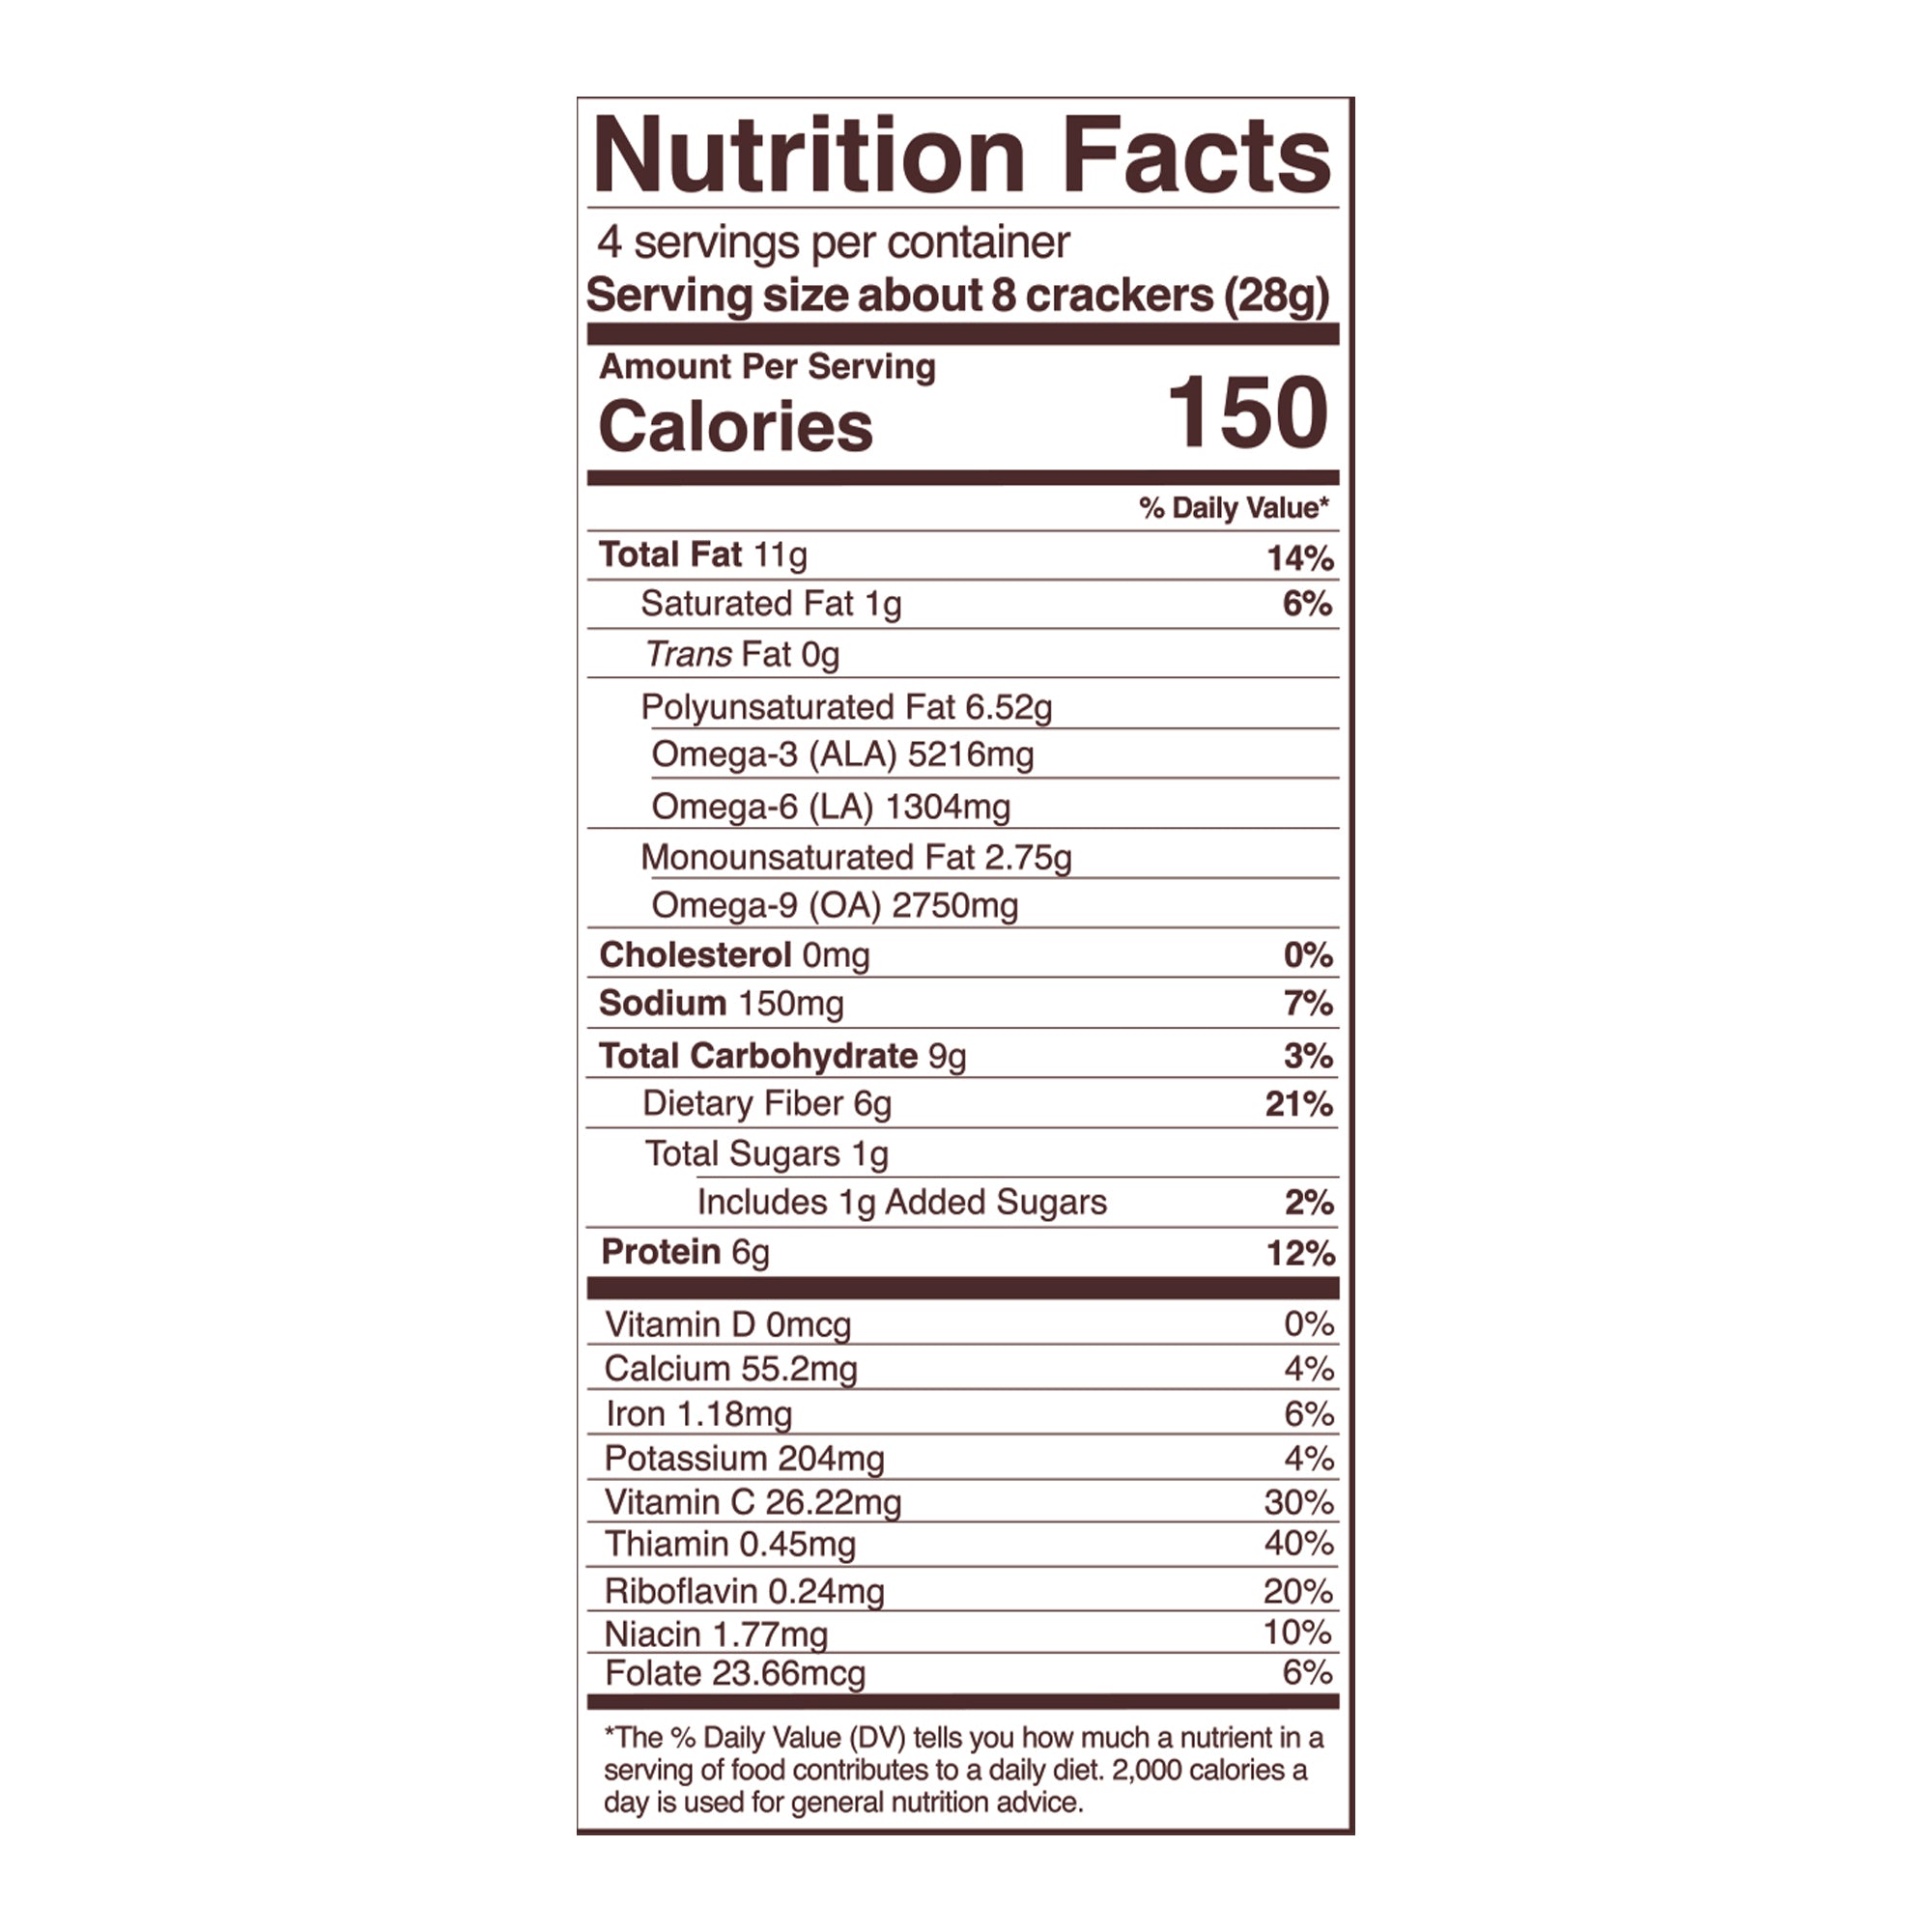 rosemary sprouted crisps nutrition fact panel